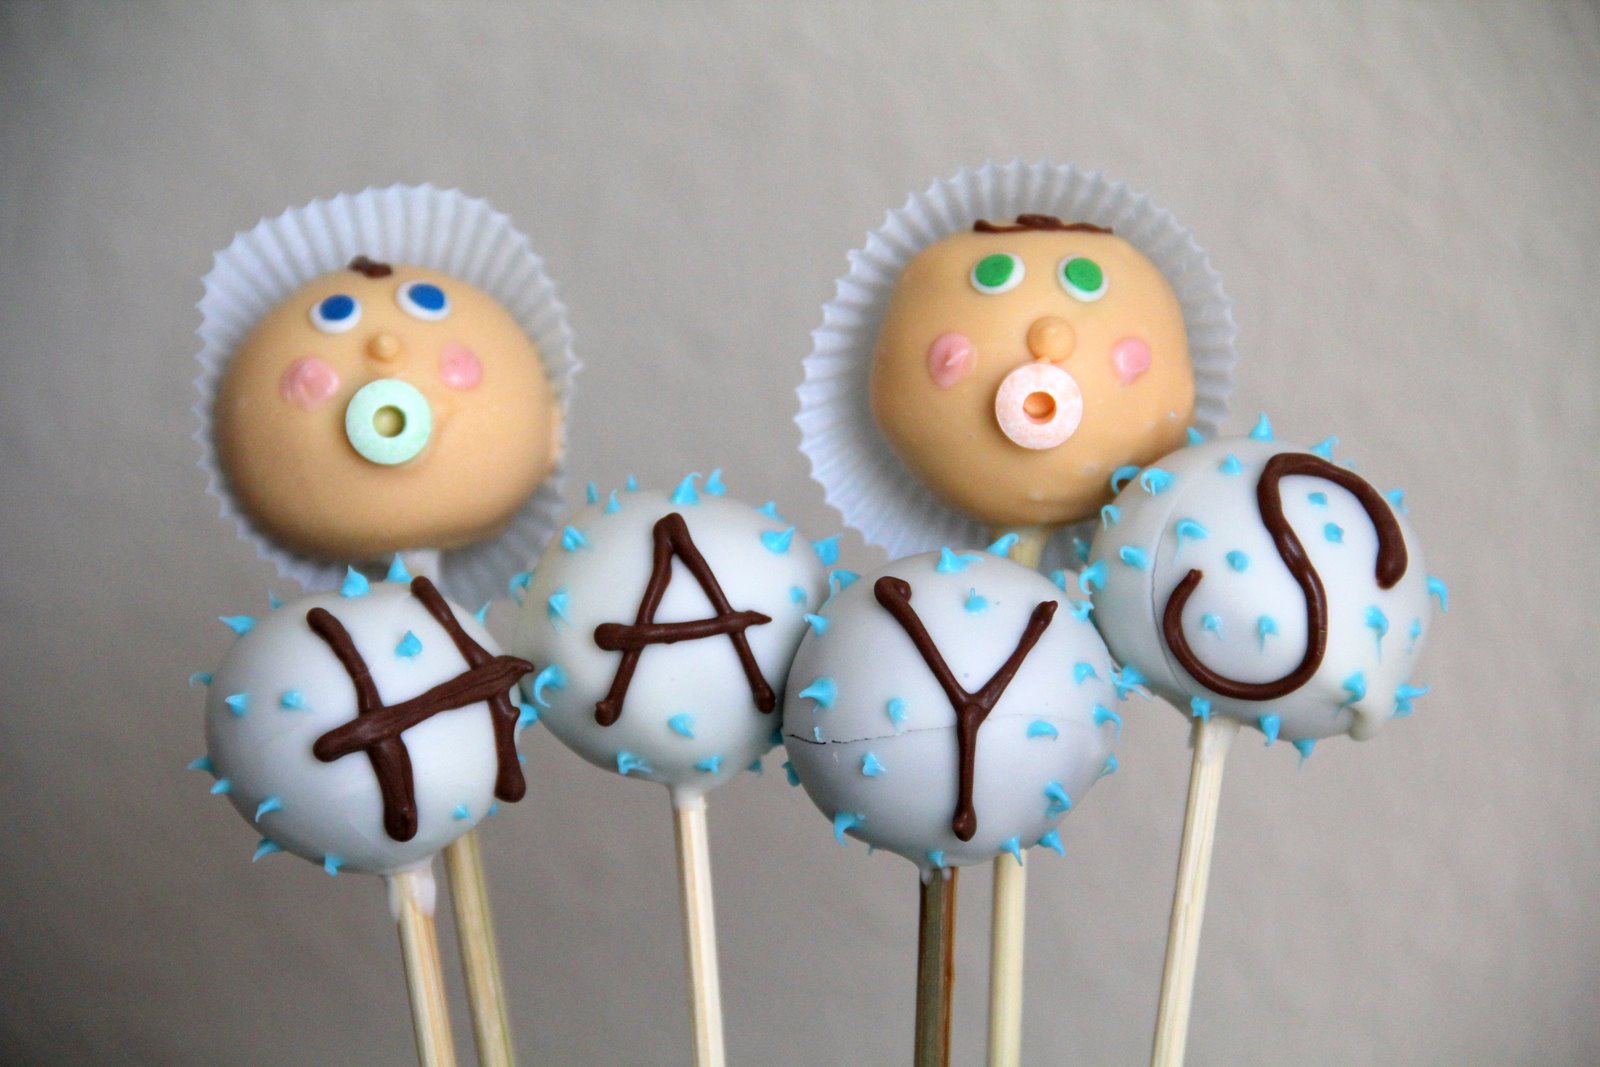 cake pops for baby shower ideas thought they turned out pretty cute and I had fun personalizing this 